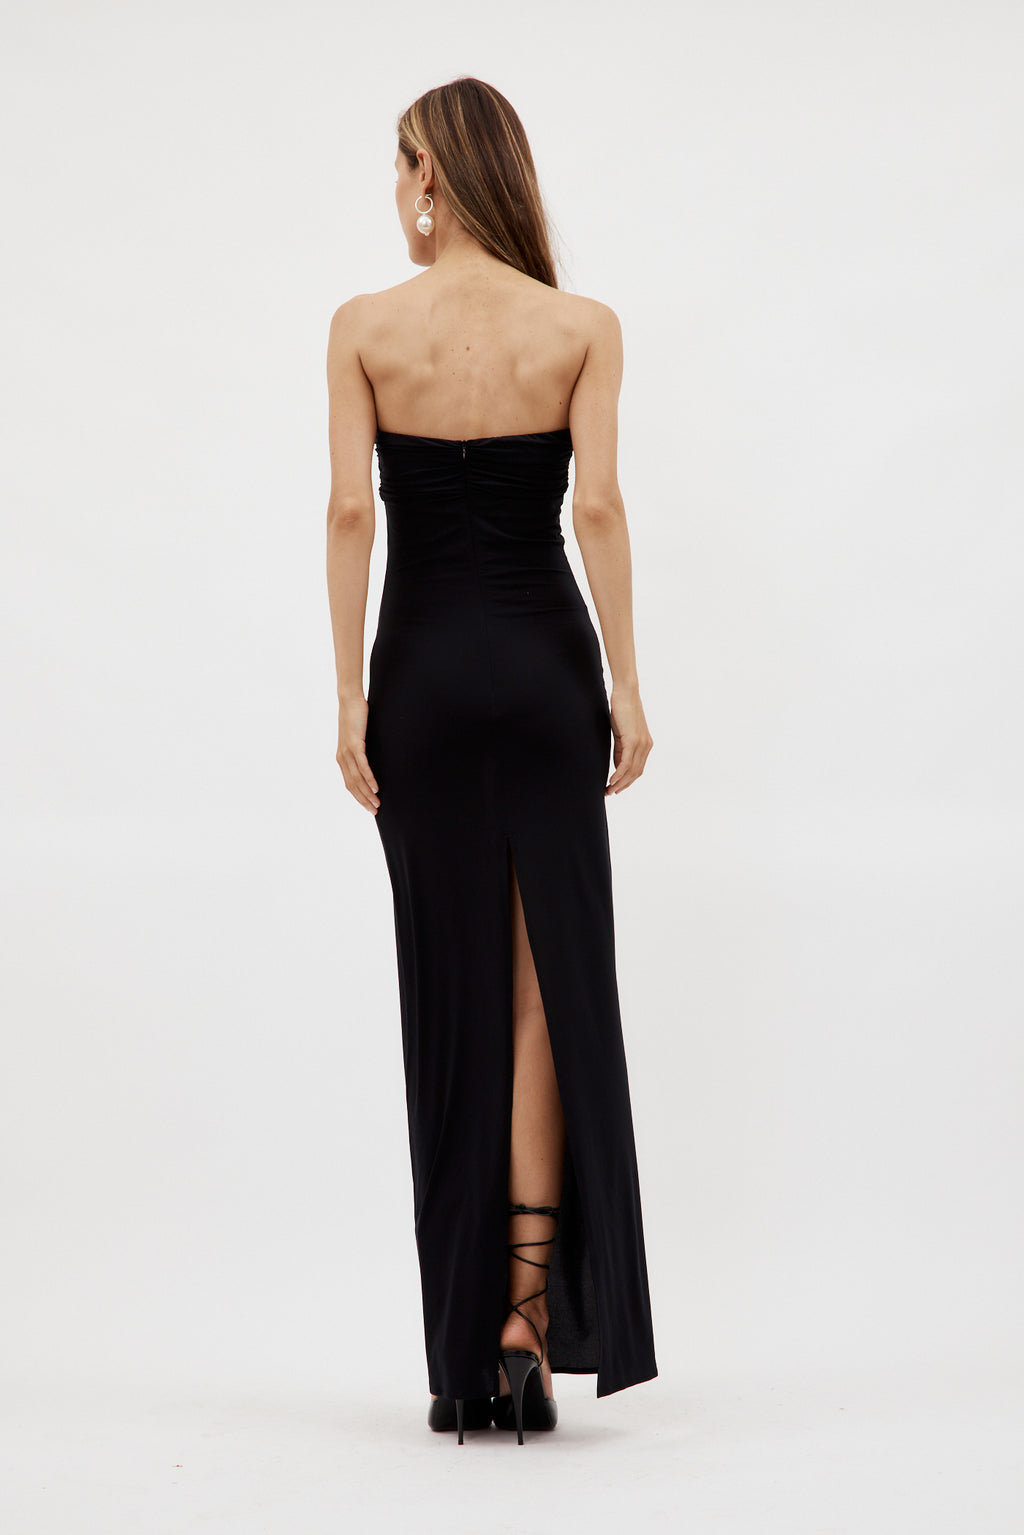 Strapless Ruched Bustier Black Maxi Dress